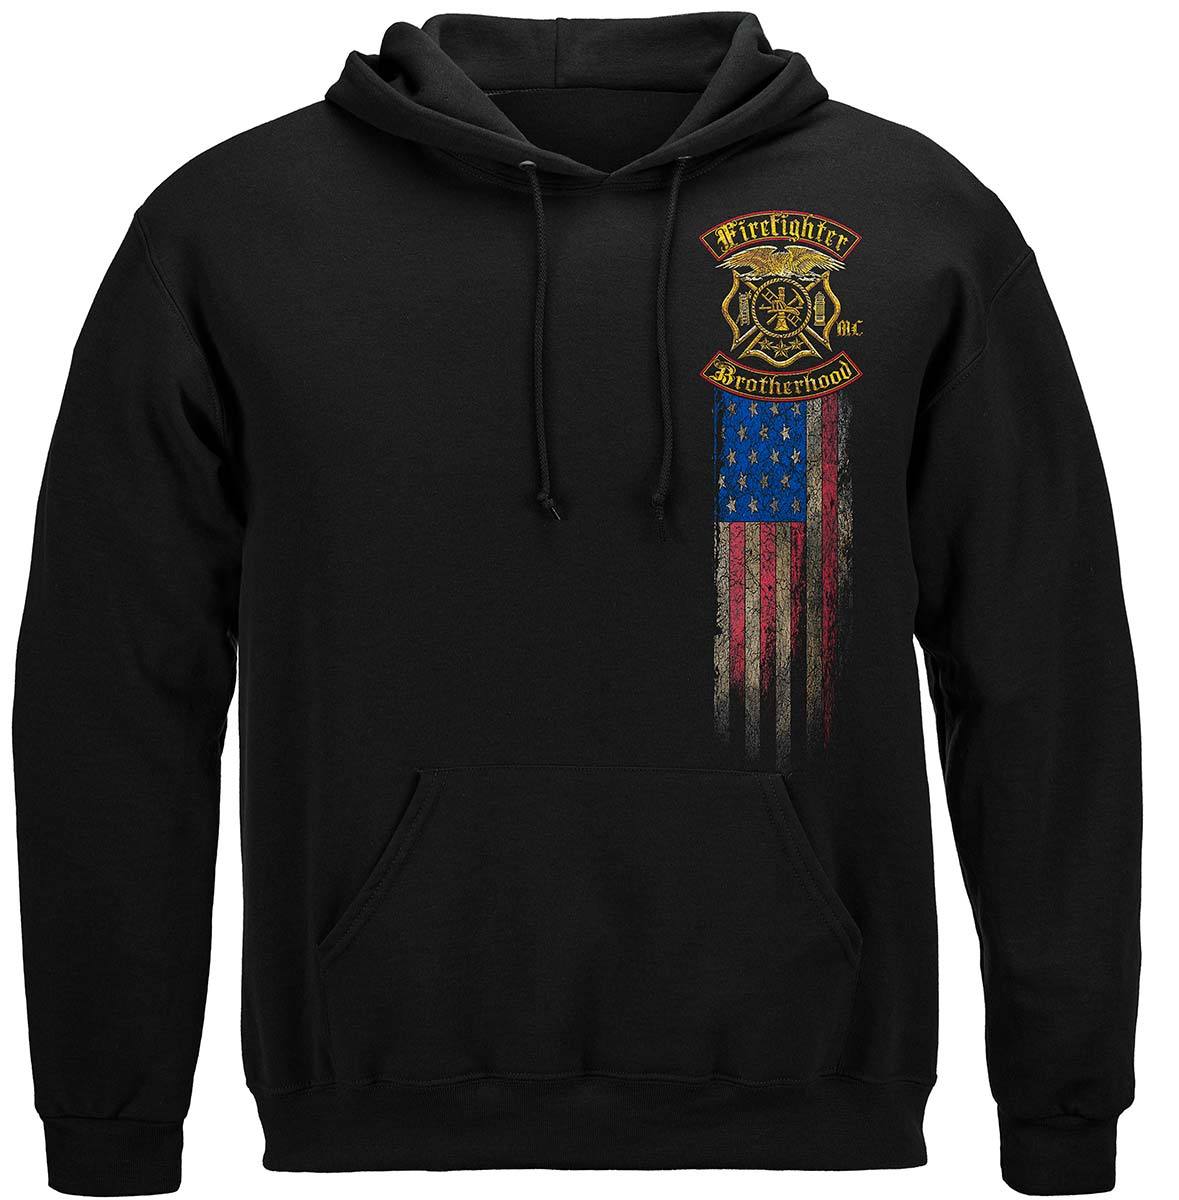 Firefighter Double Flagged Brotherhood Distressed Gold Foil Premium Long Sleeves